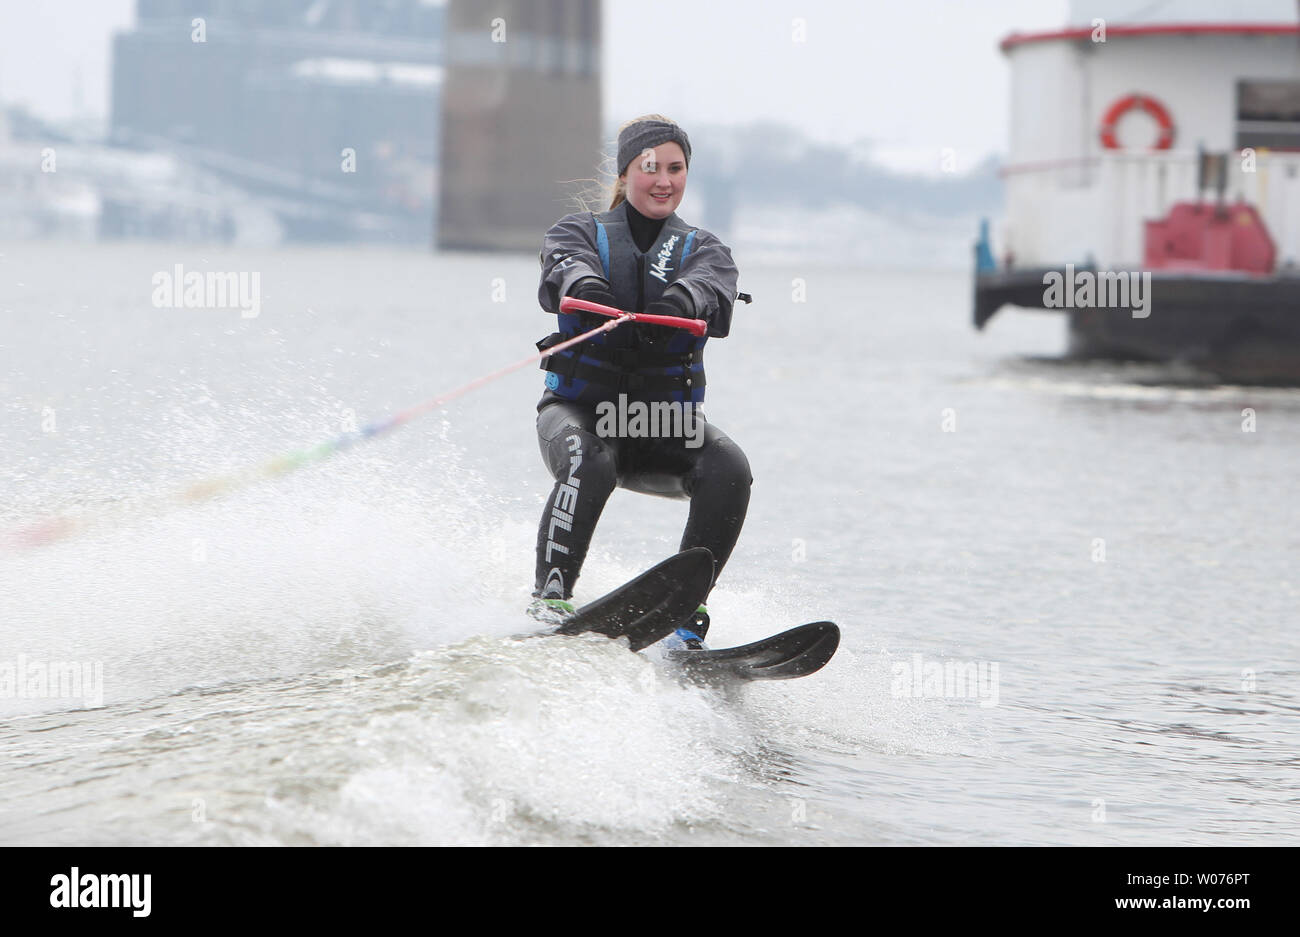 Skier Mallory Diederich negotiates a wake while water skiing on the Mississippi River in St. Louis on January 1, 2013. Several skiers continued a 27 year tradition of skiing on the Mississippi River on New Years Day. UPI/Bill Greenblatt Stock Photo